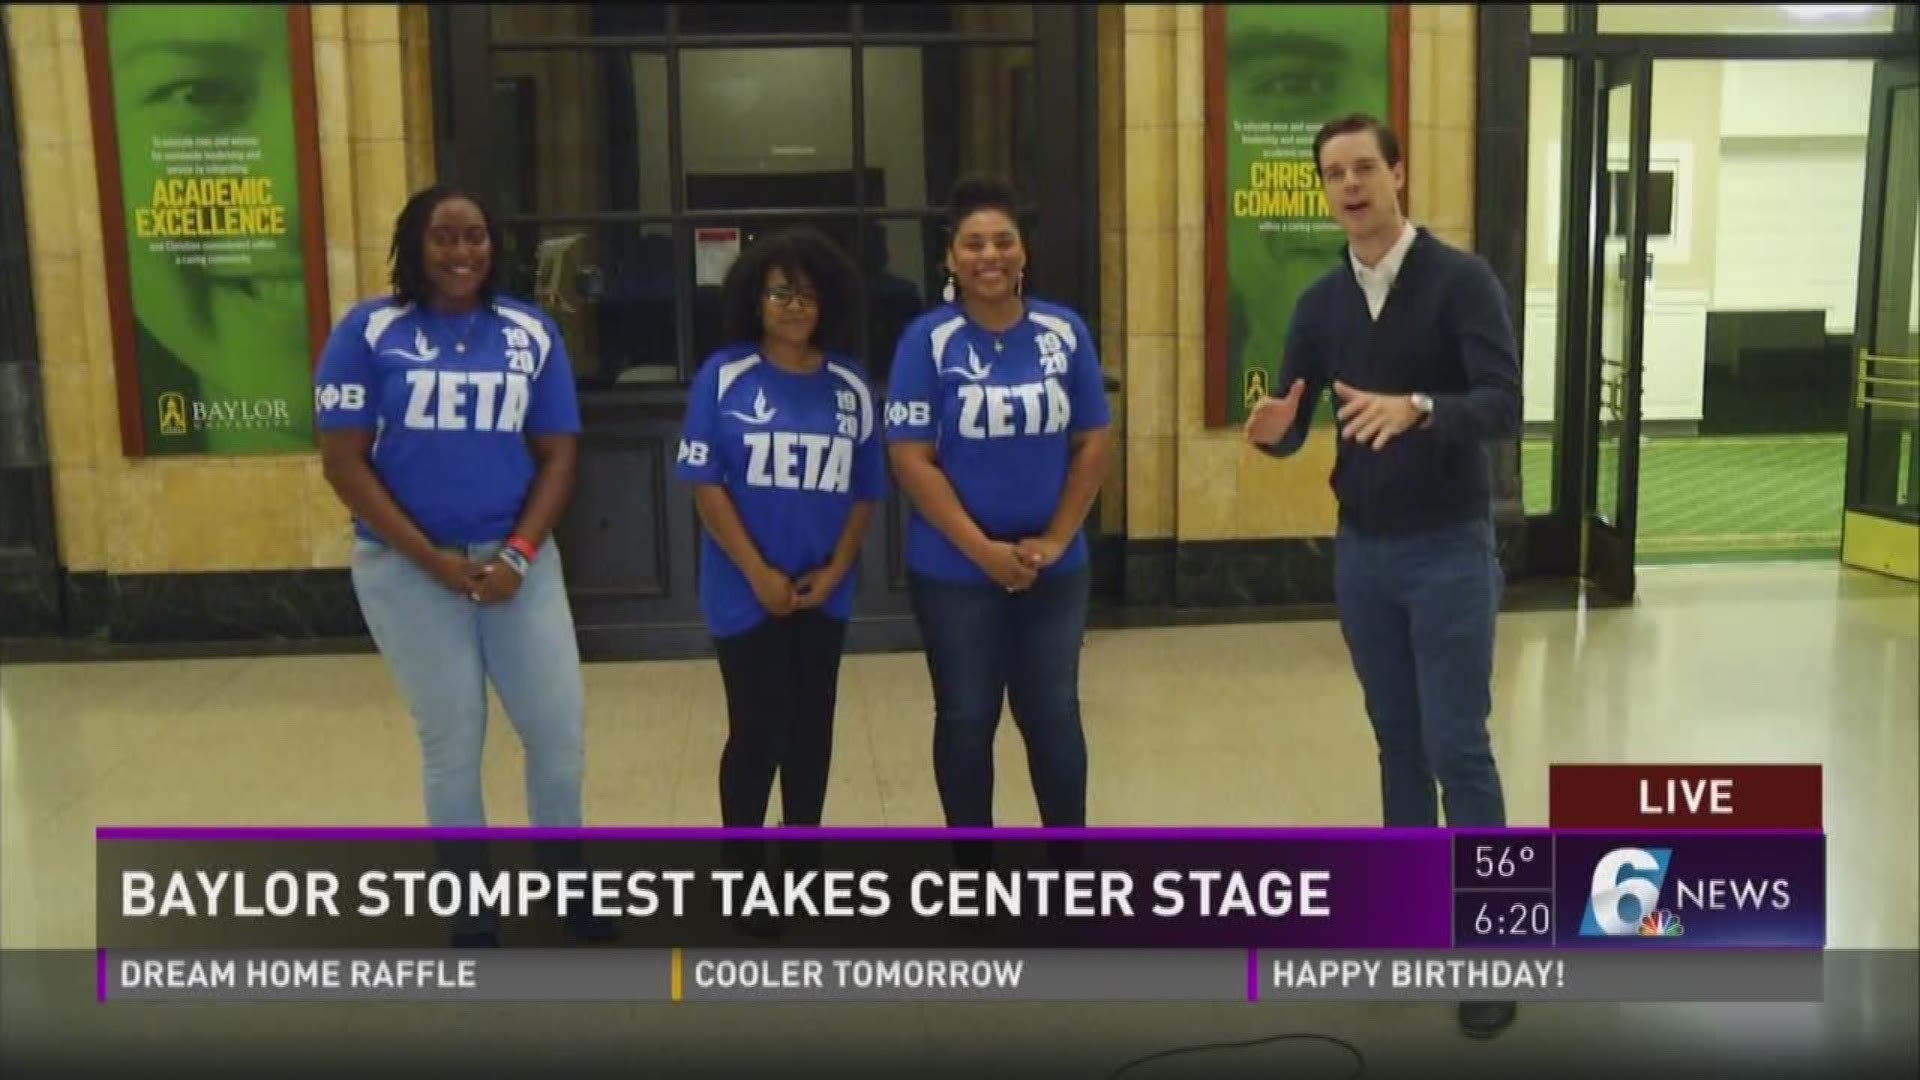 Zeta Phi Beta Sorority, Inc will hosting its annual step show, Stompfest, to raise money for St. Jude Sickle Cell Anemia research and other philanthropies connected